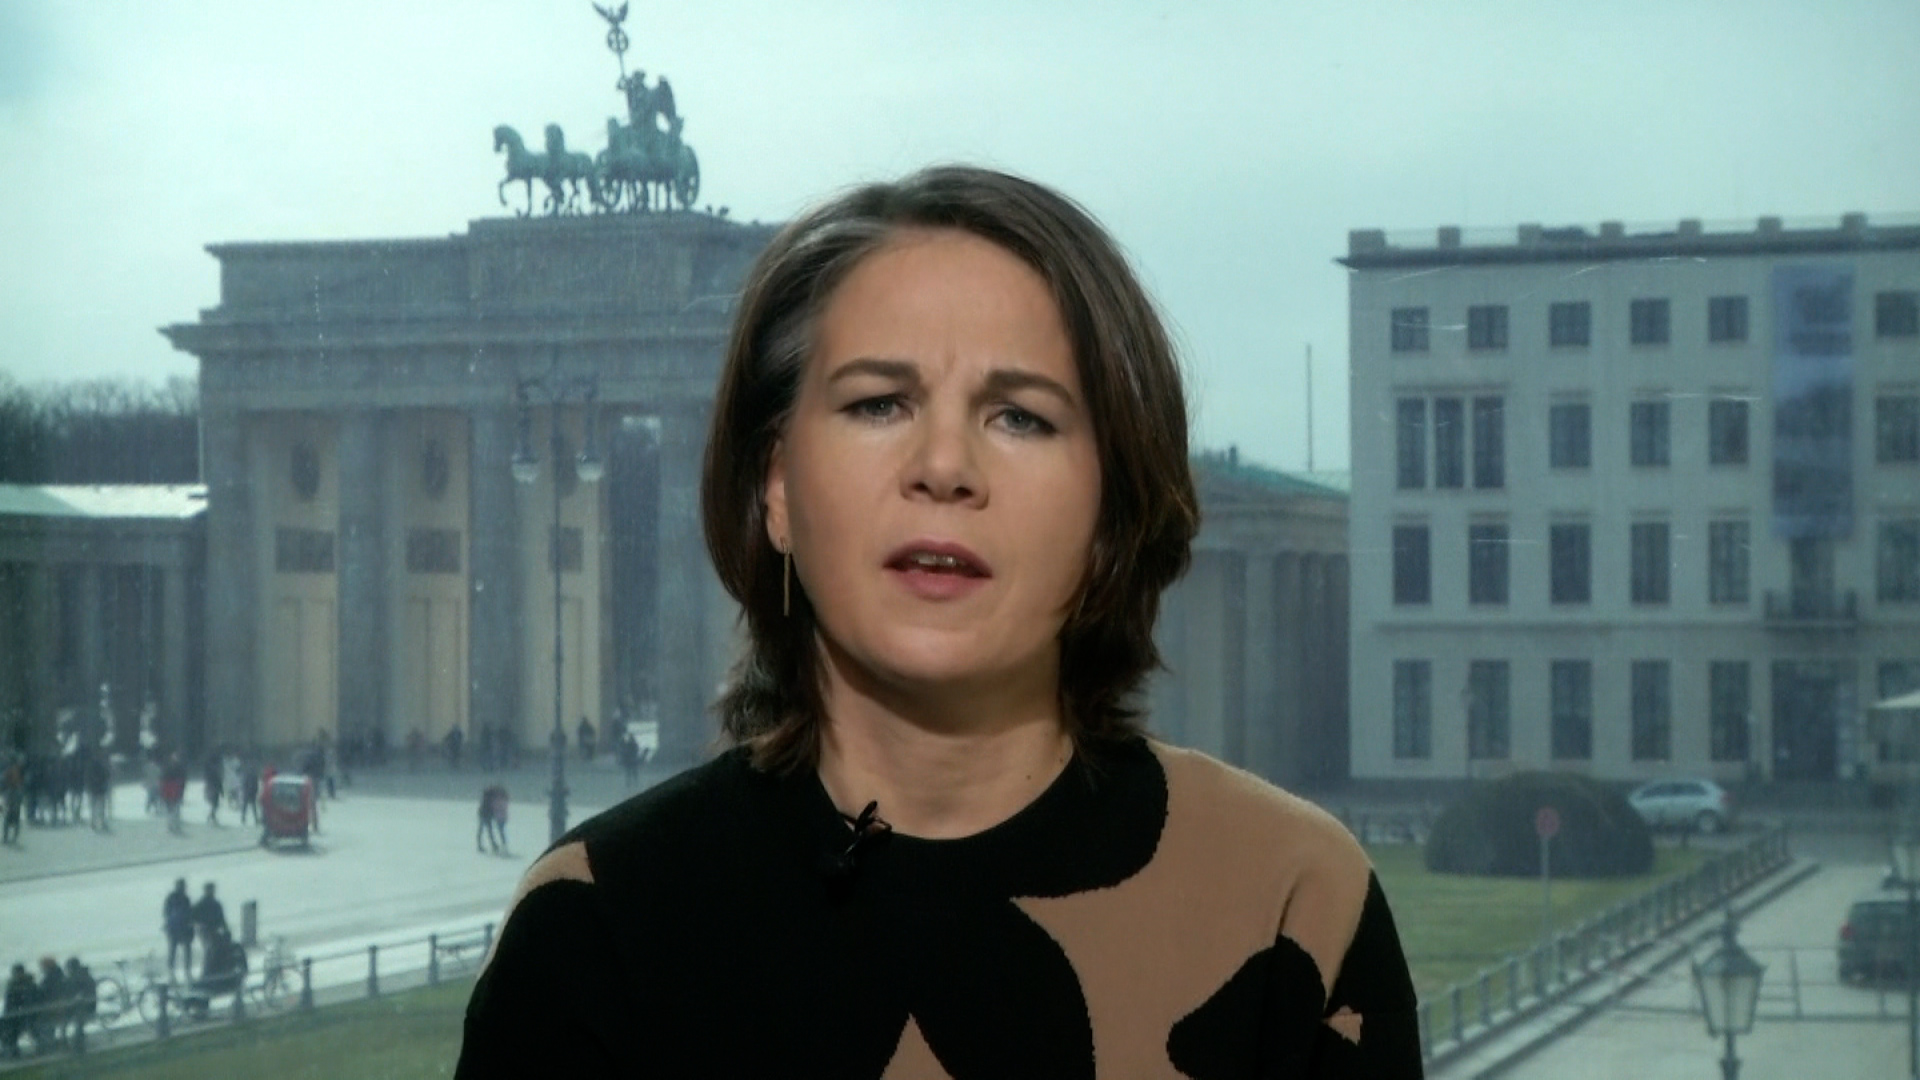 Germany’s Minister for Foreign Affairs Annalena Baerbock